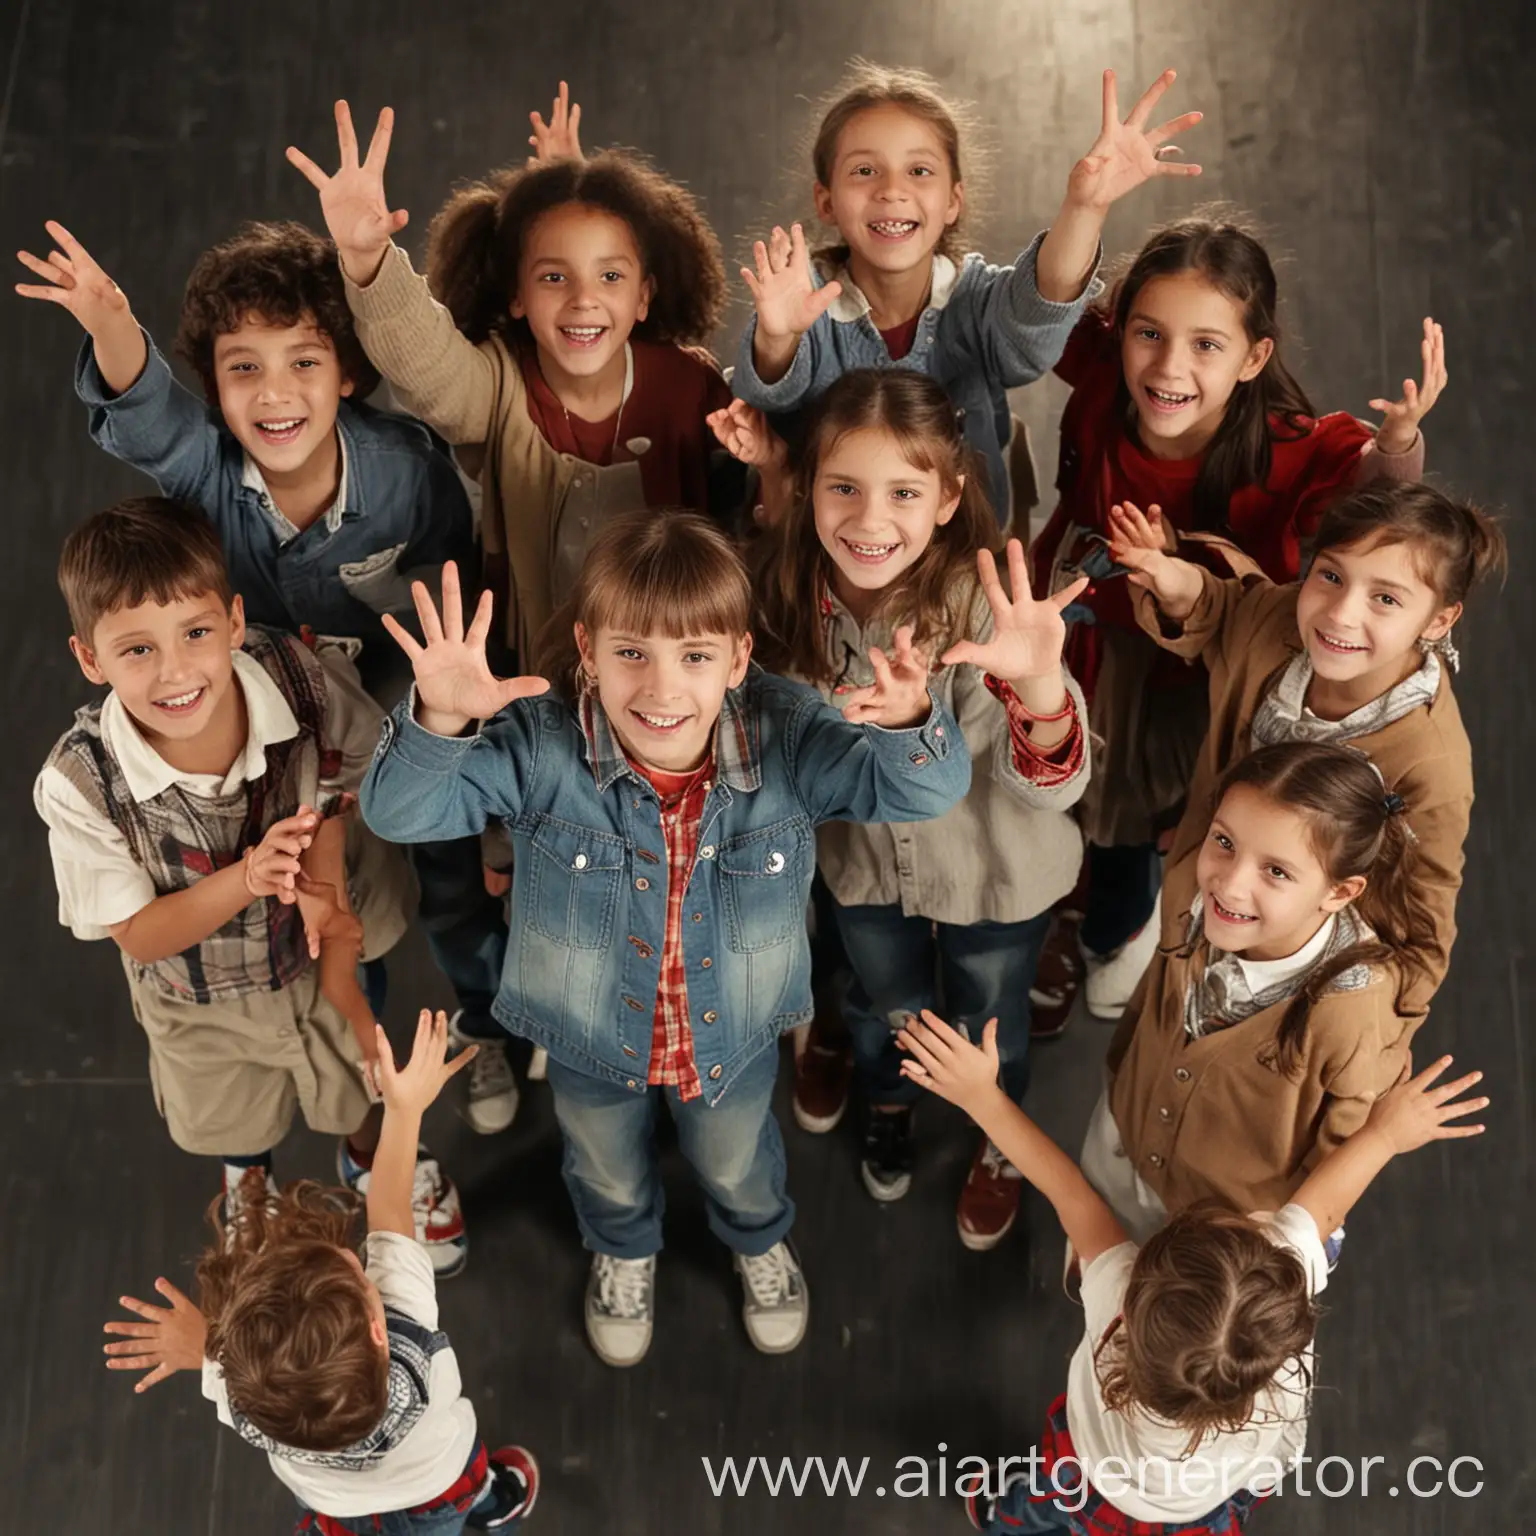 Joyful-Children-on-Stage-Giving-High-Five-to-Camera